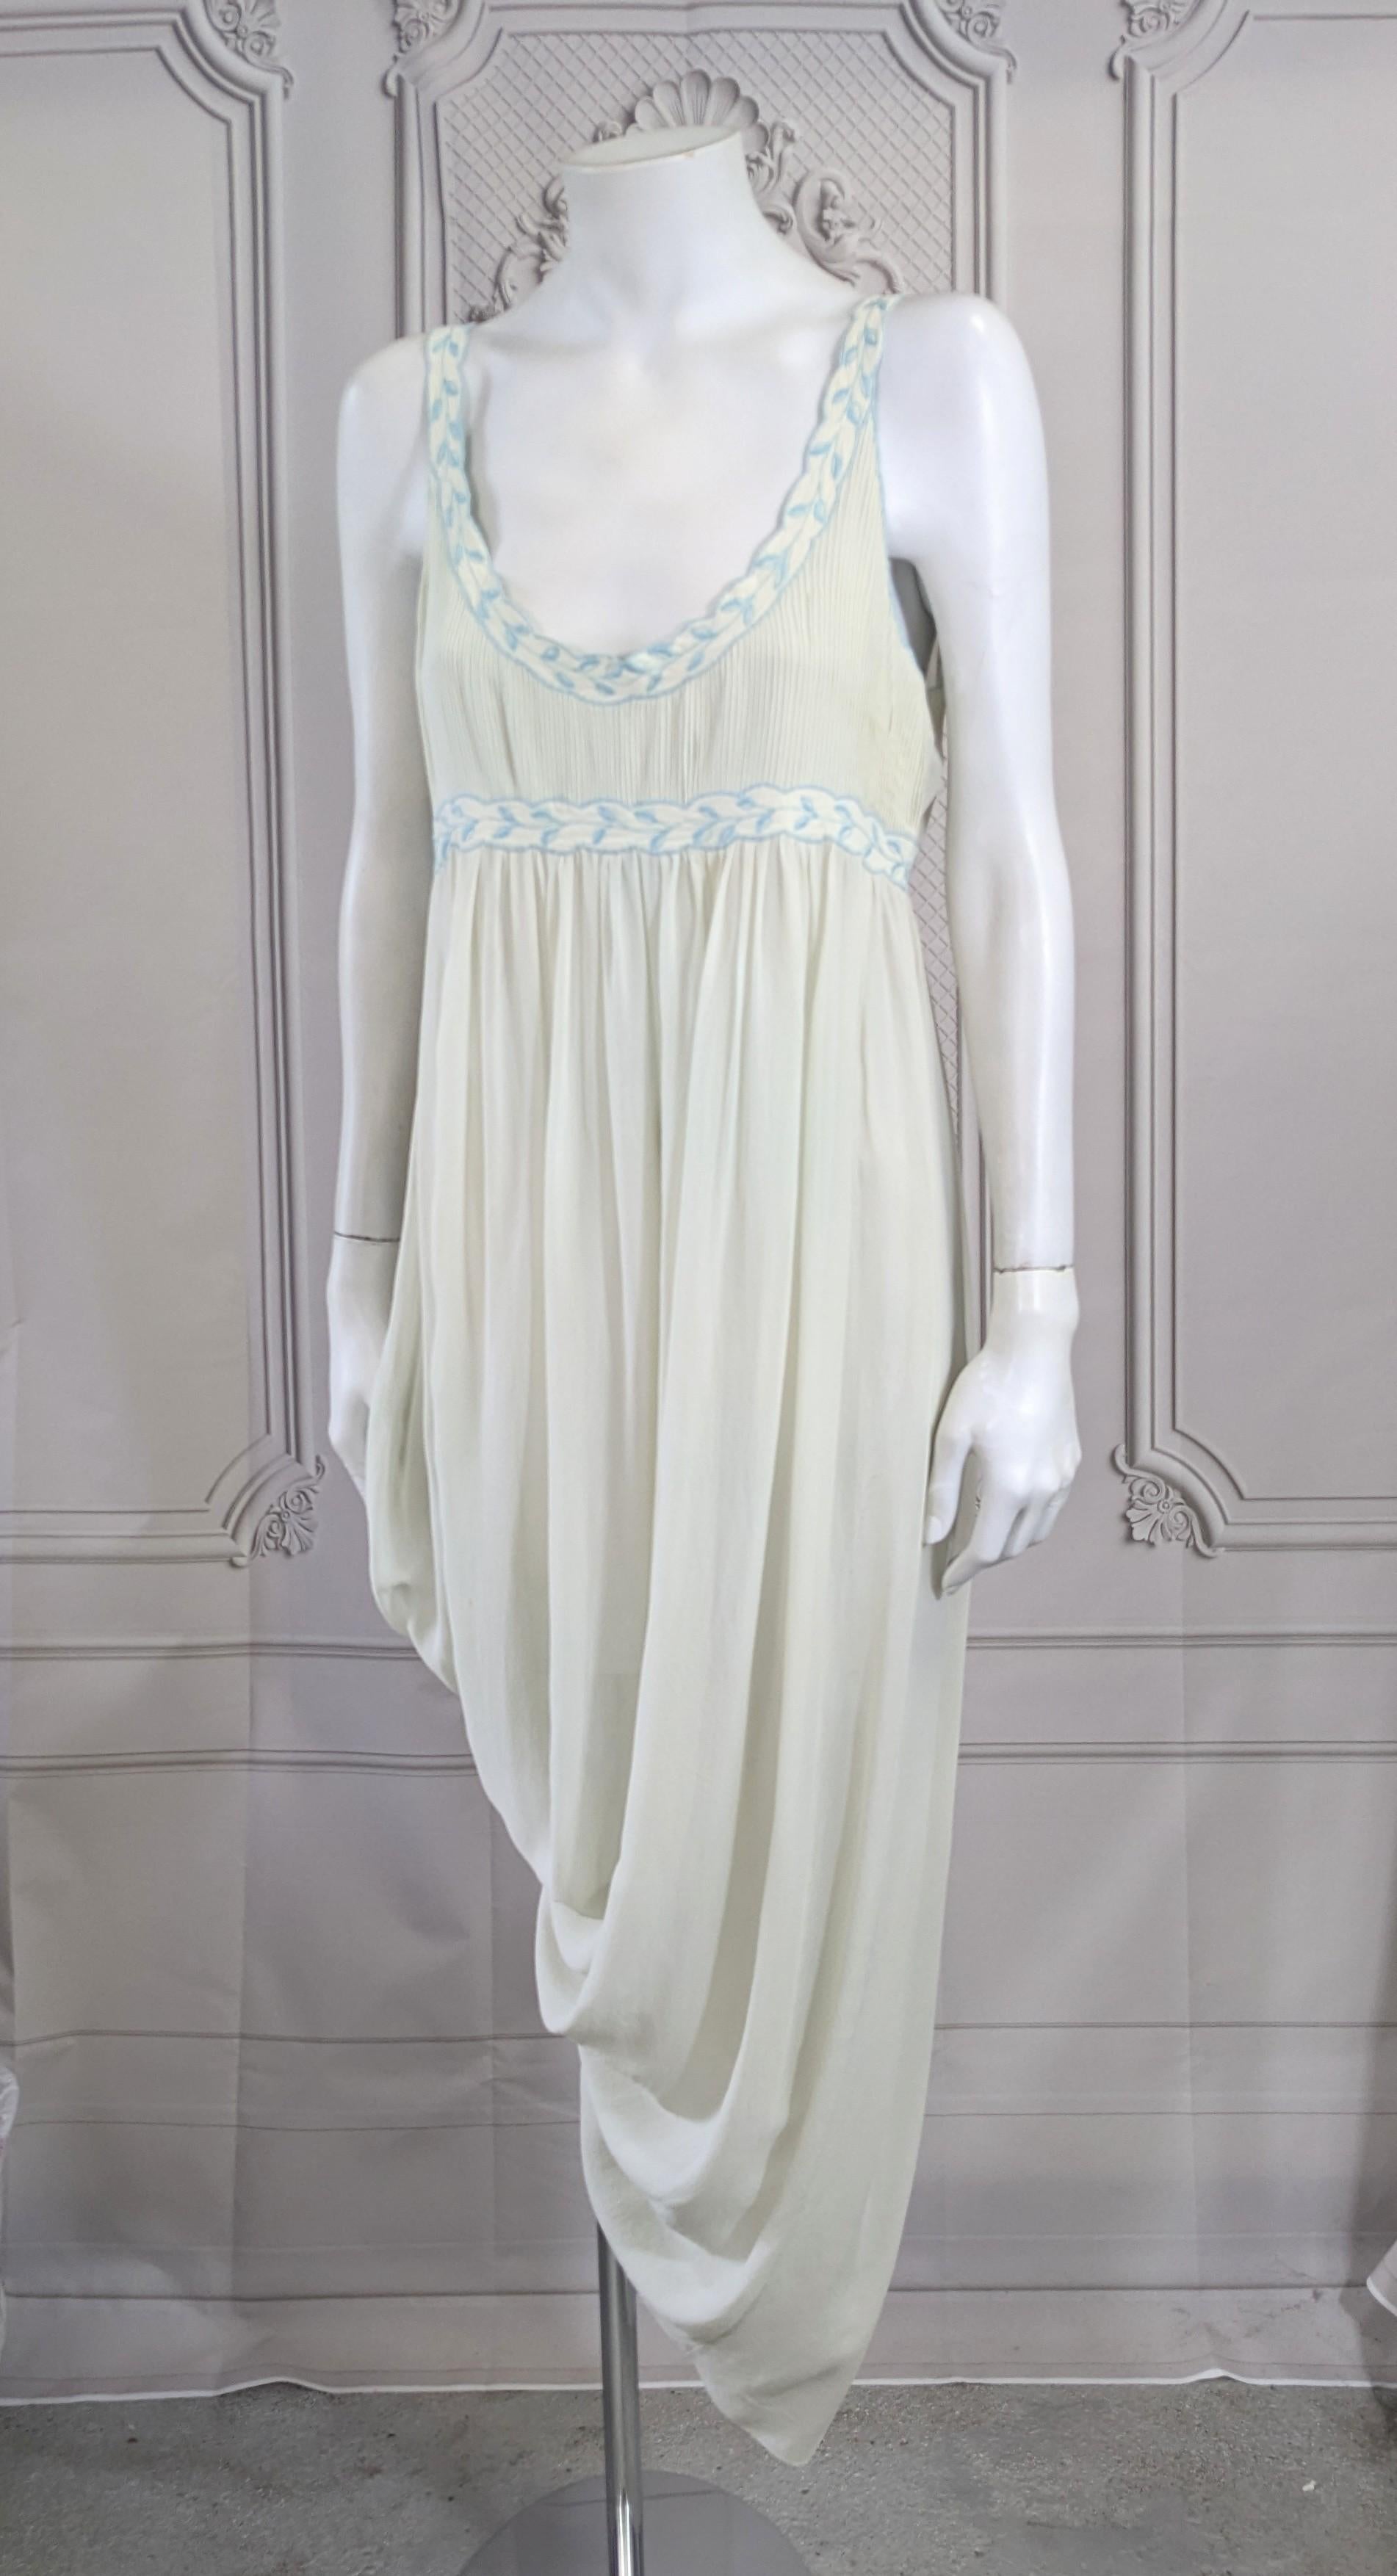 Silk Chiffon Pale Seafoam Green Slip Dress, Hand Embroidered in teal blue silk from the 1930's. Simple cut but with amazing handwork. The bodice has minute hand tucking and all the floral motifs are hand embroidered. Wonderful easy sheer slip dress,